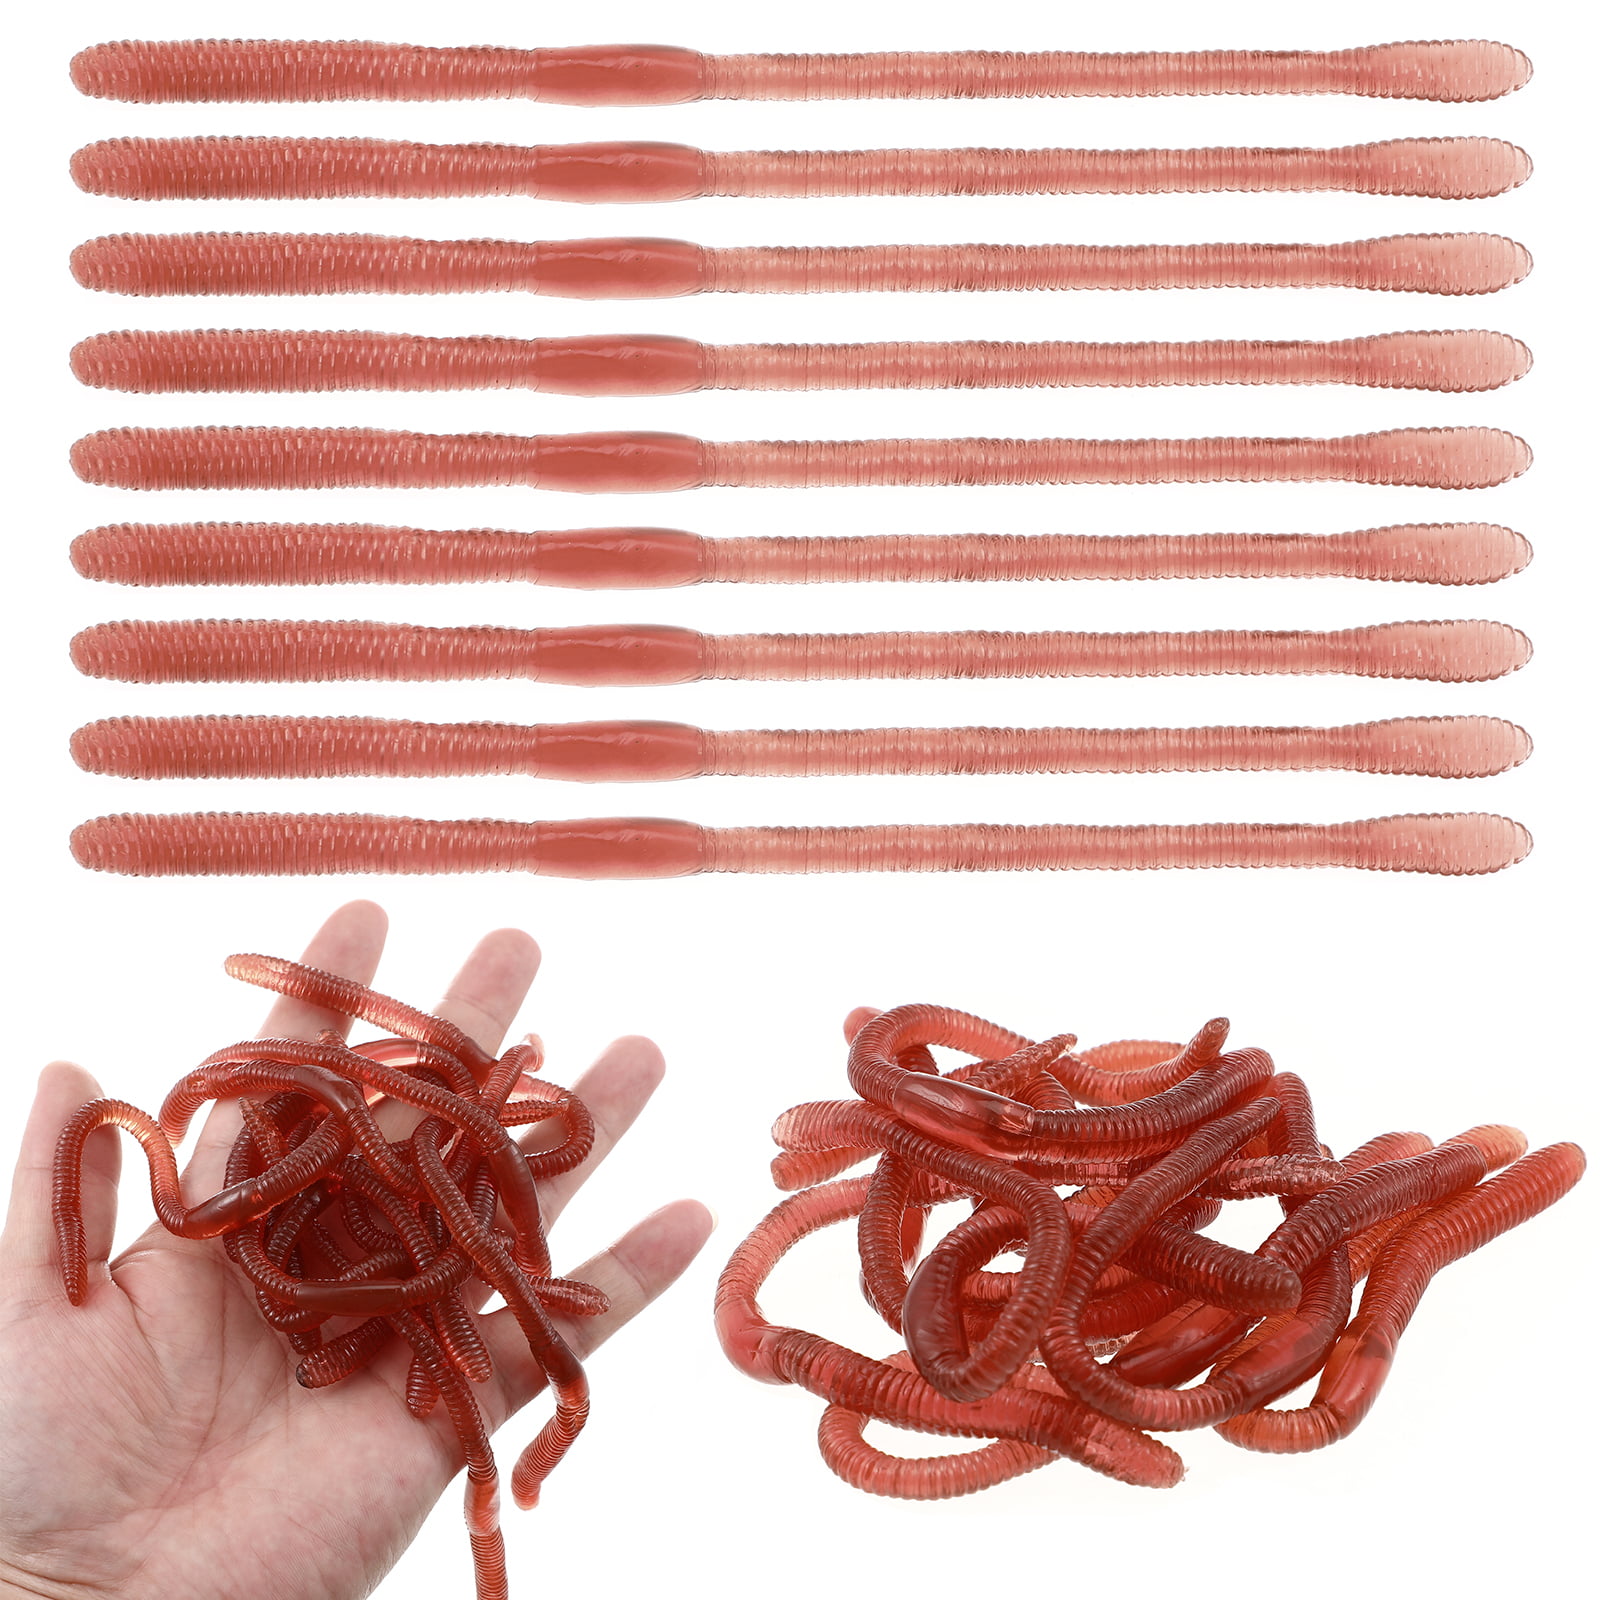 Artificial Earthworm 10 Pcs Fake Worms Toy Earthworms Baits Models Soft  Rubber Plastic 